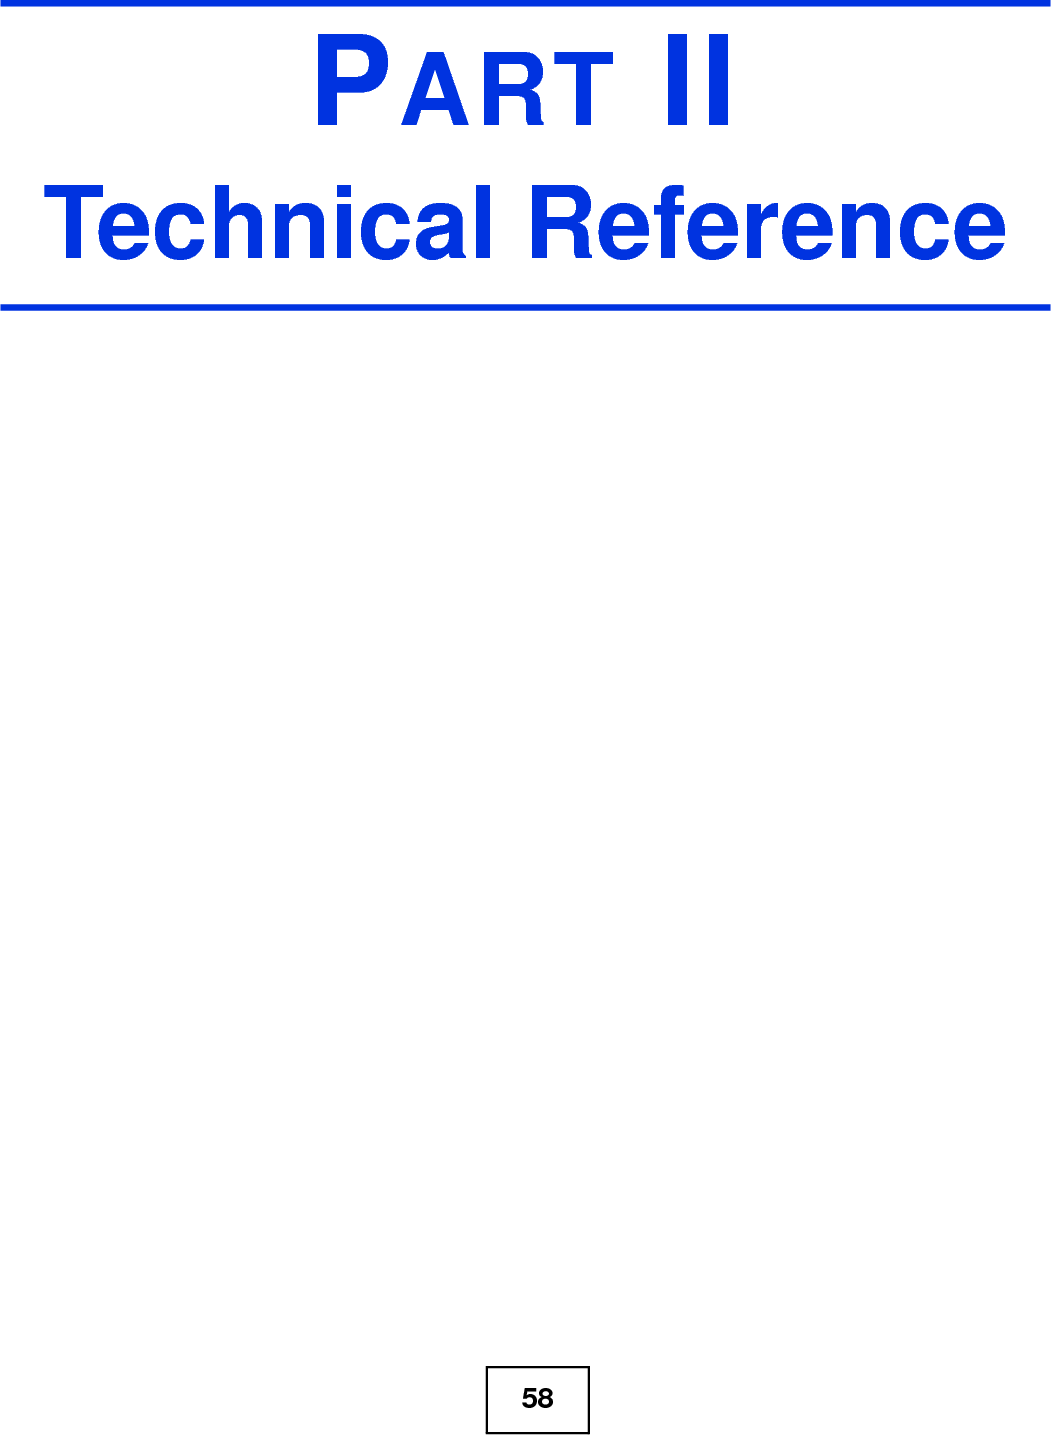 58PART IITechnical Reference